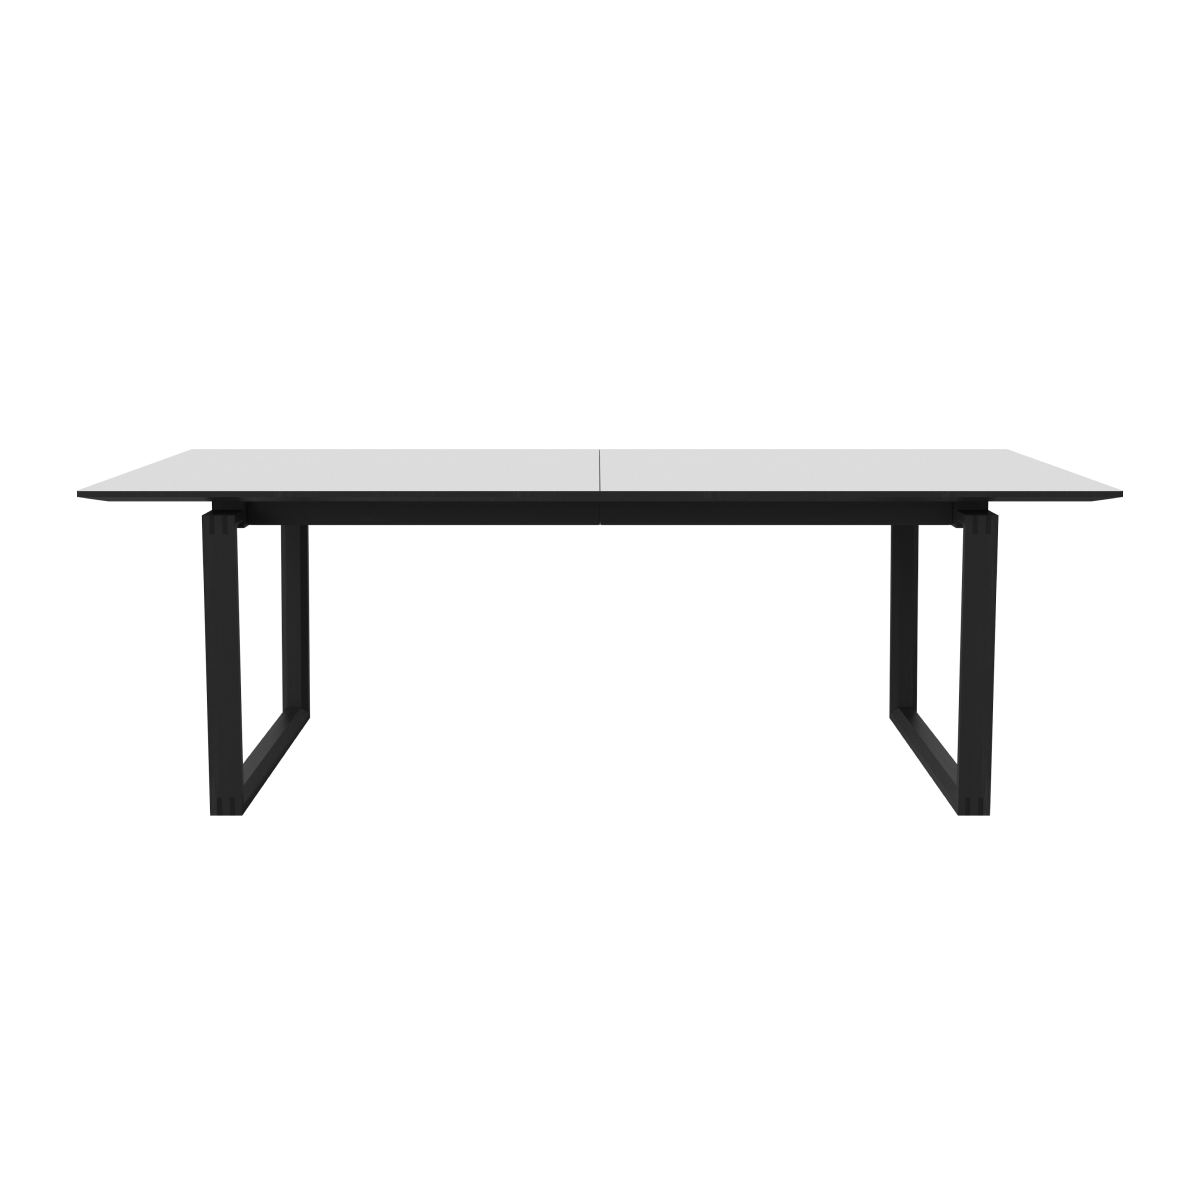 BOLIA [Outlet|DP] Nord Dining Table 220 cm - White Laminate / Black Stained Oiled Oak